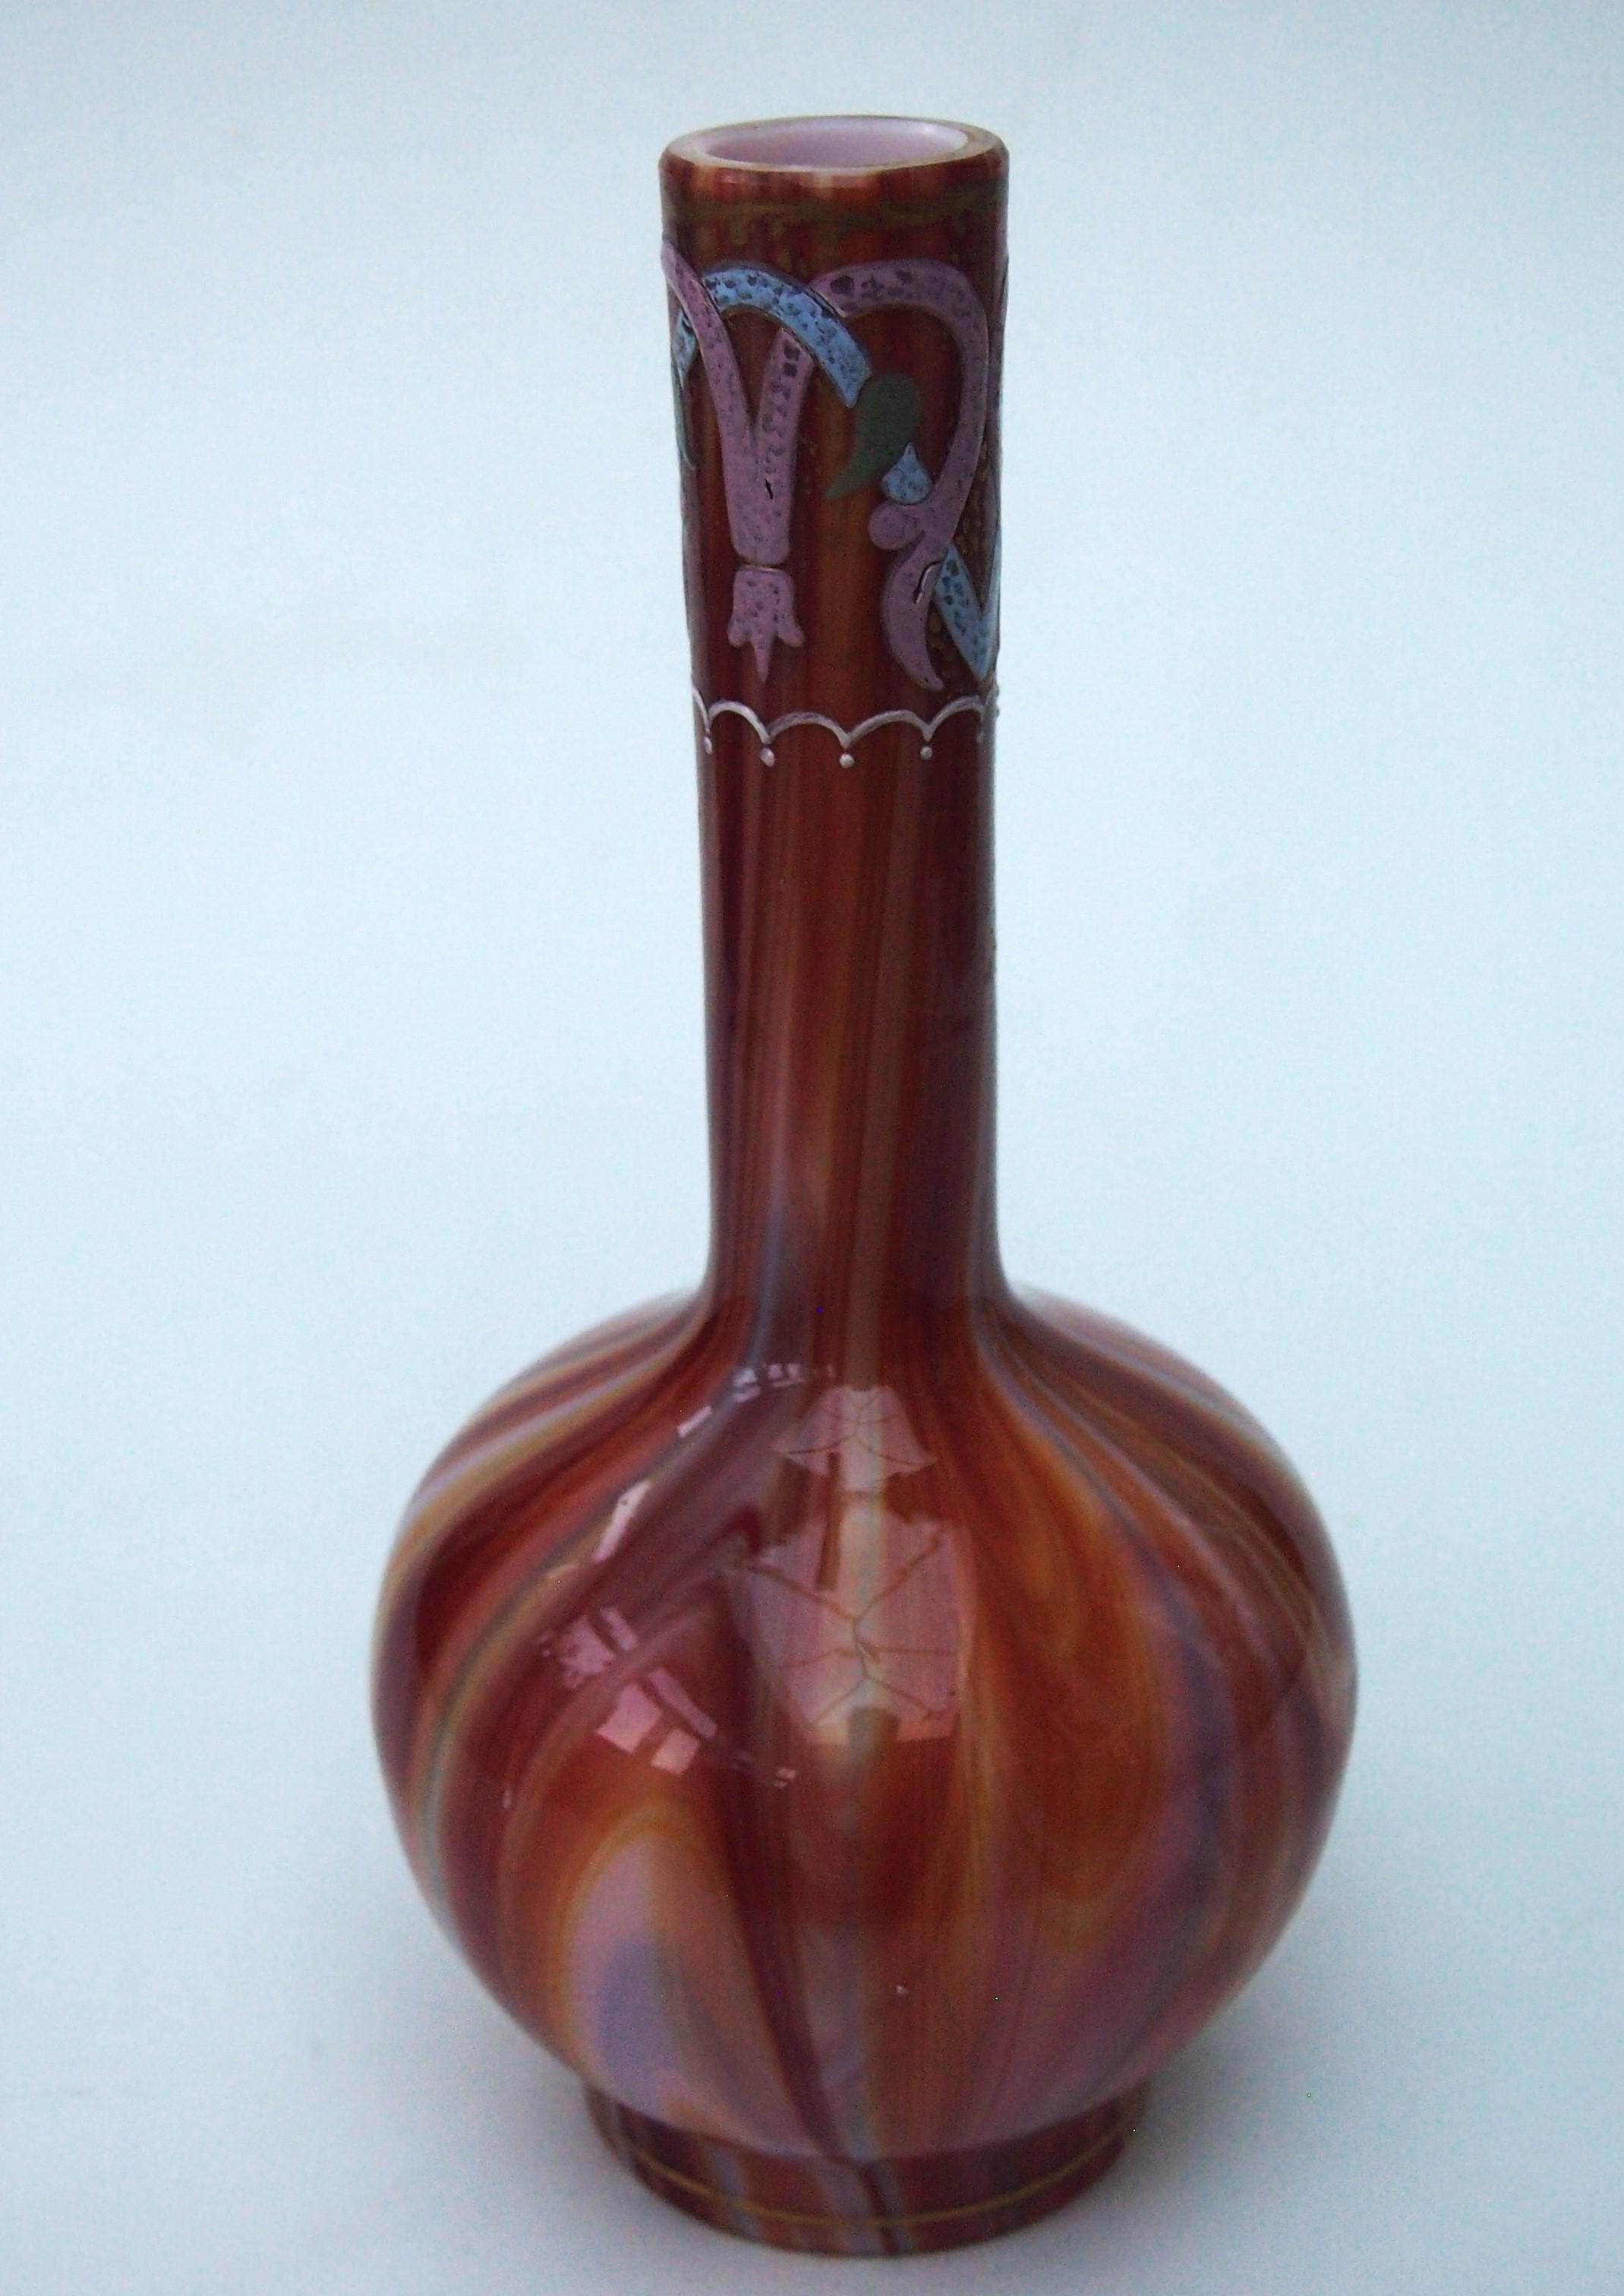 Classic Loetz 'ball and stem' vase in the early documented Onyx pattern in an unusual combination of  vibrant orange, red and brown over opaque white -this pattern dates to c 1887-8. The vase is decorated at the top of the neck with one of their